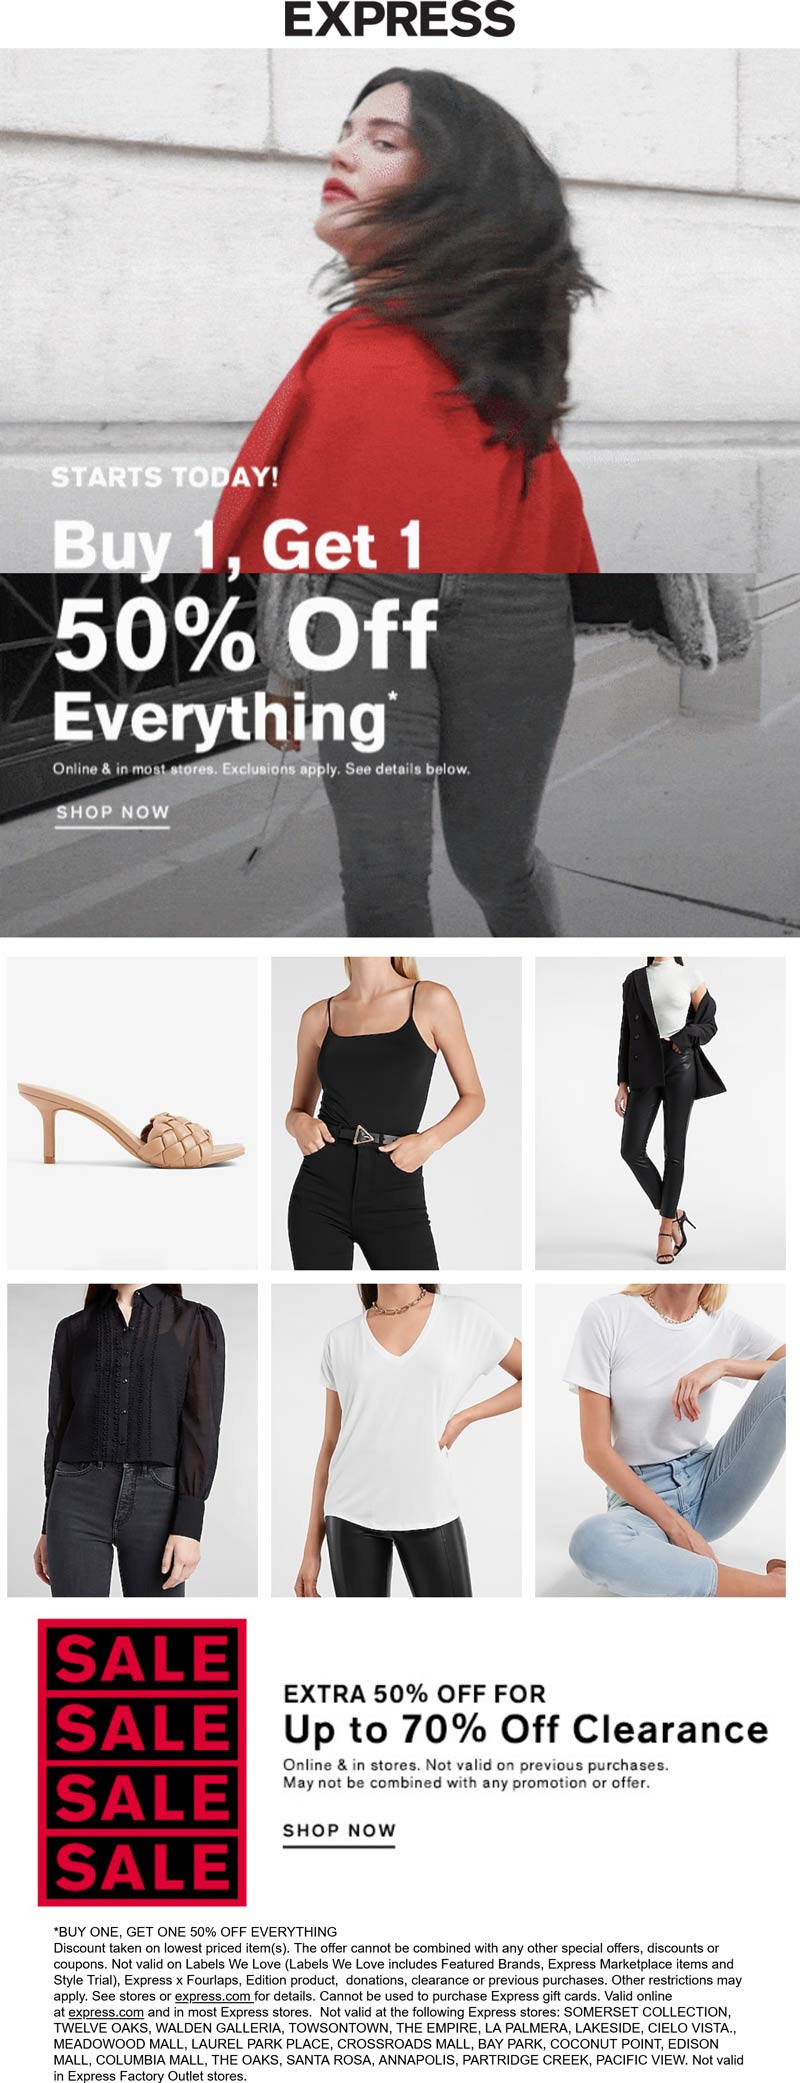 Express stores Coupon  Second item 50% off on everything at Express, ditto online #express 